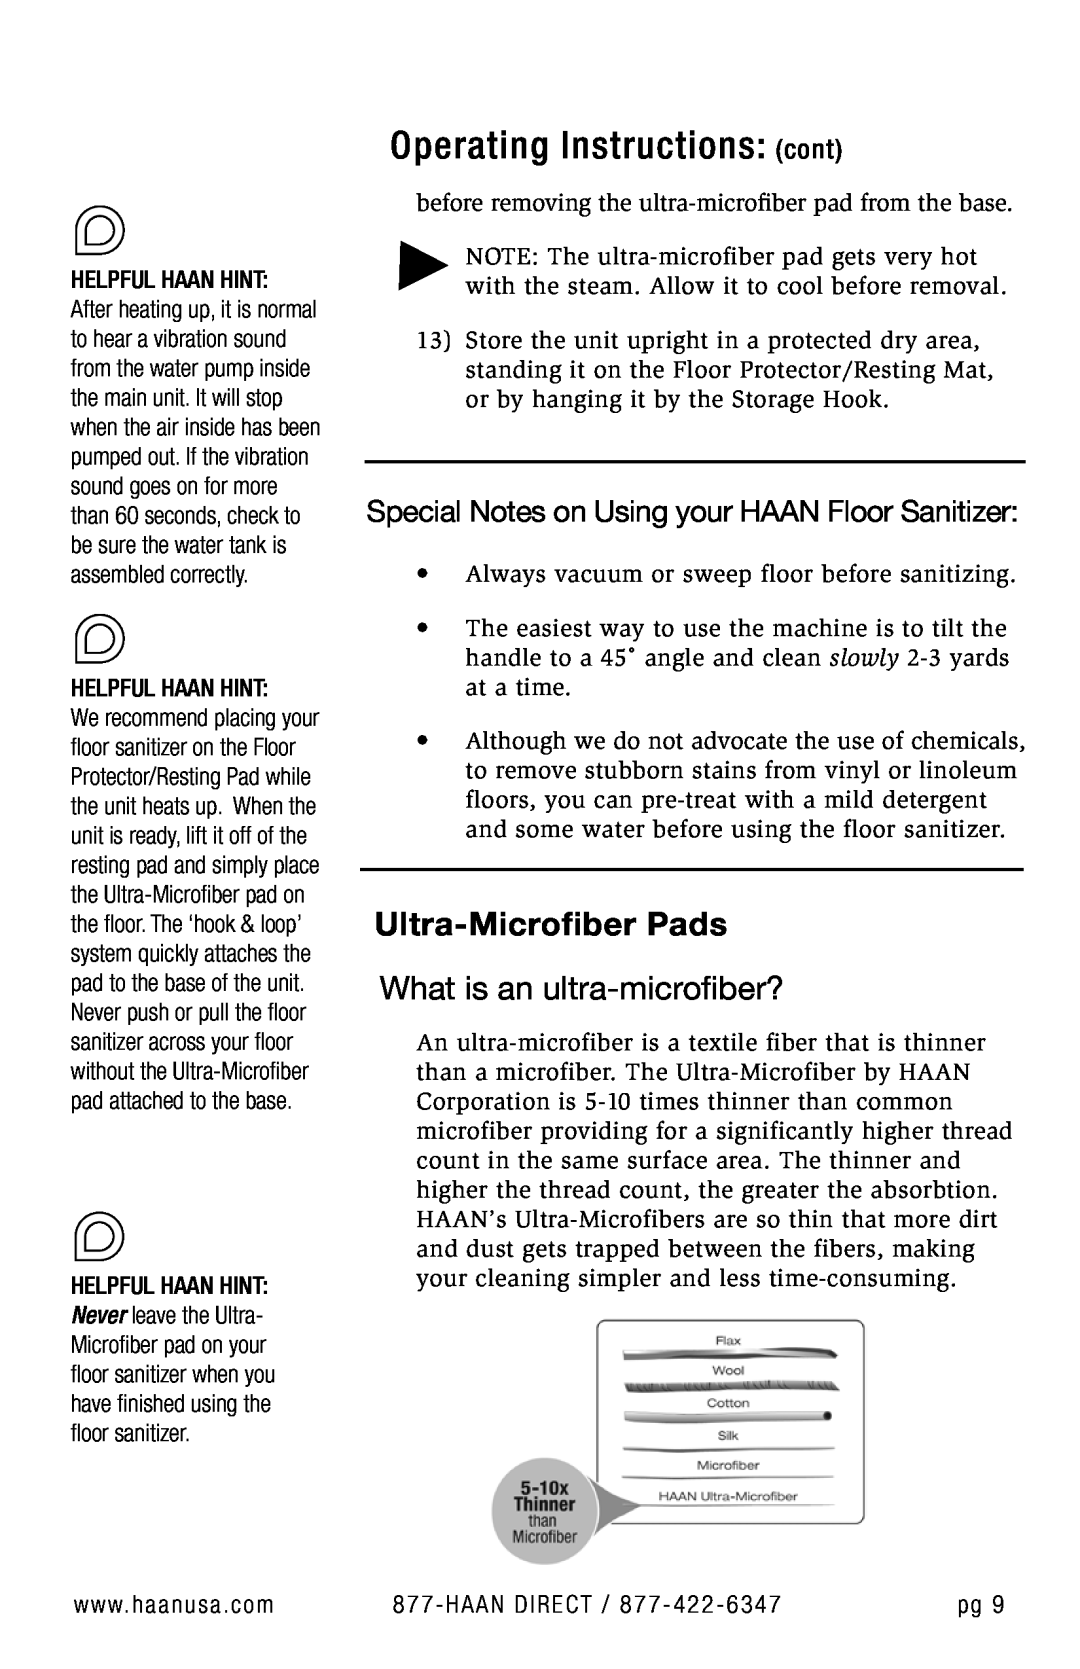 Haan SI-35 user manual Operating Instructions cont, Ultra-MicrofiberPads, What is an ultra-microfiber? 